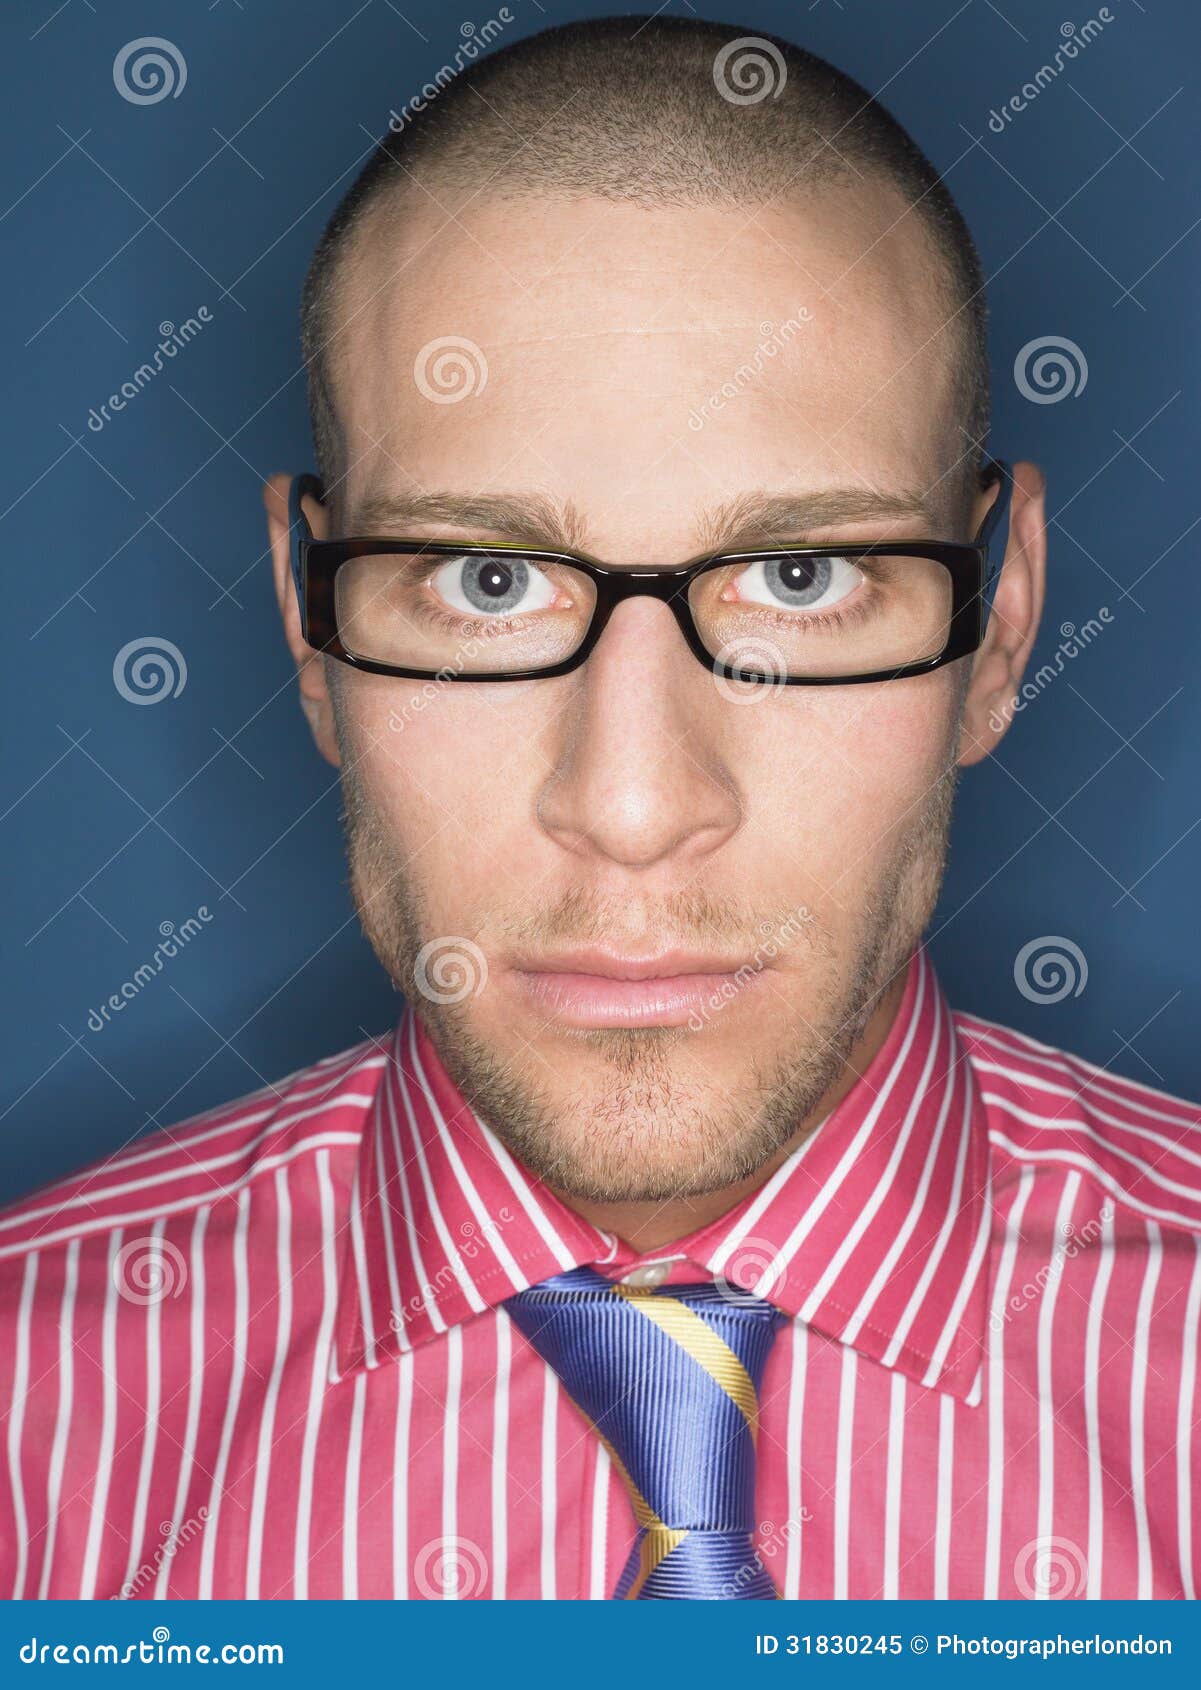 Portrait Of Serious Bald Man In Glasses Royalty Free Stock Photo